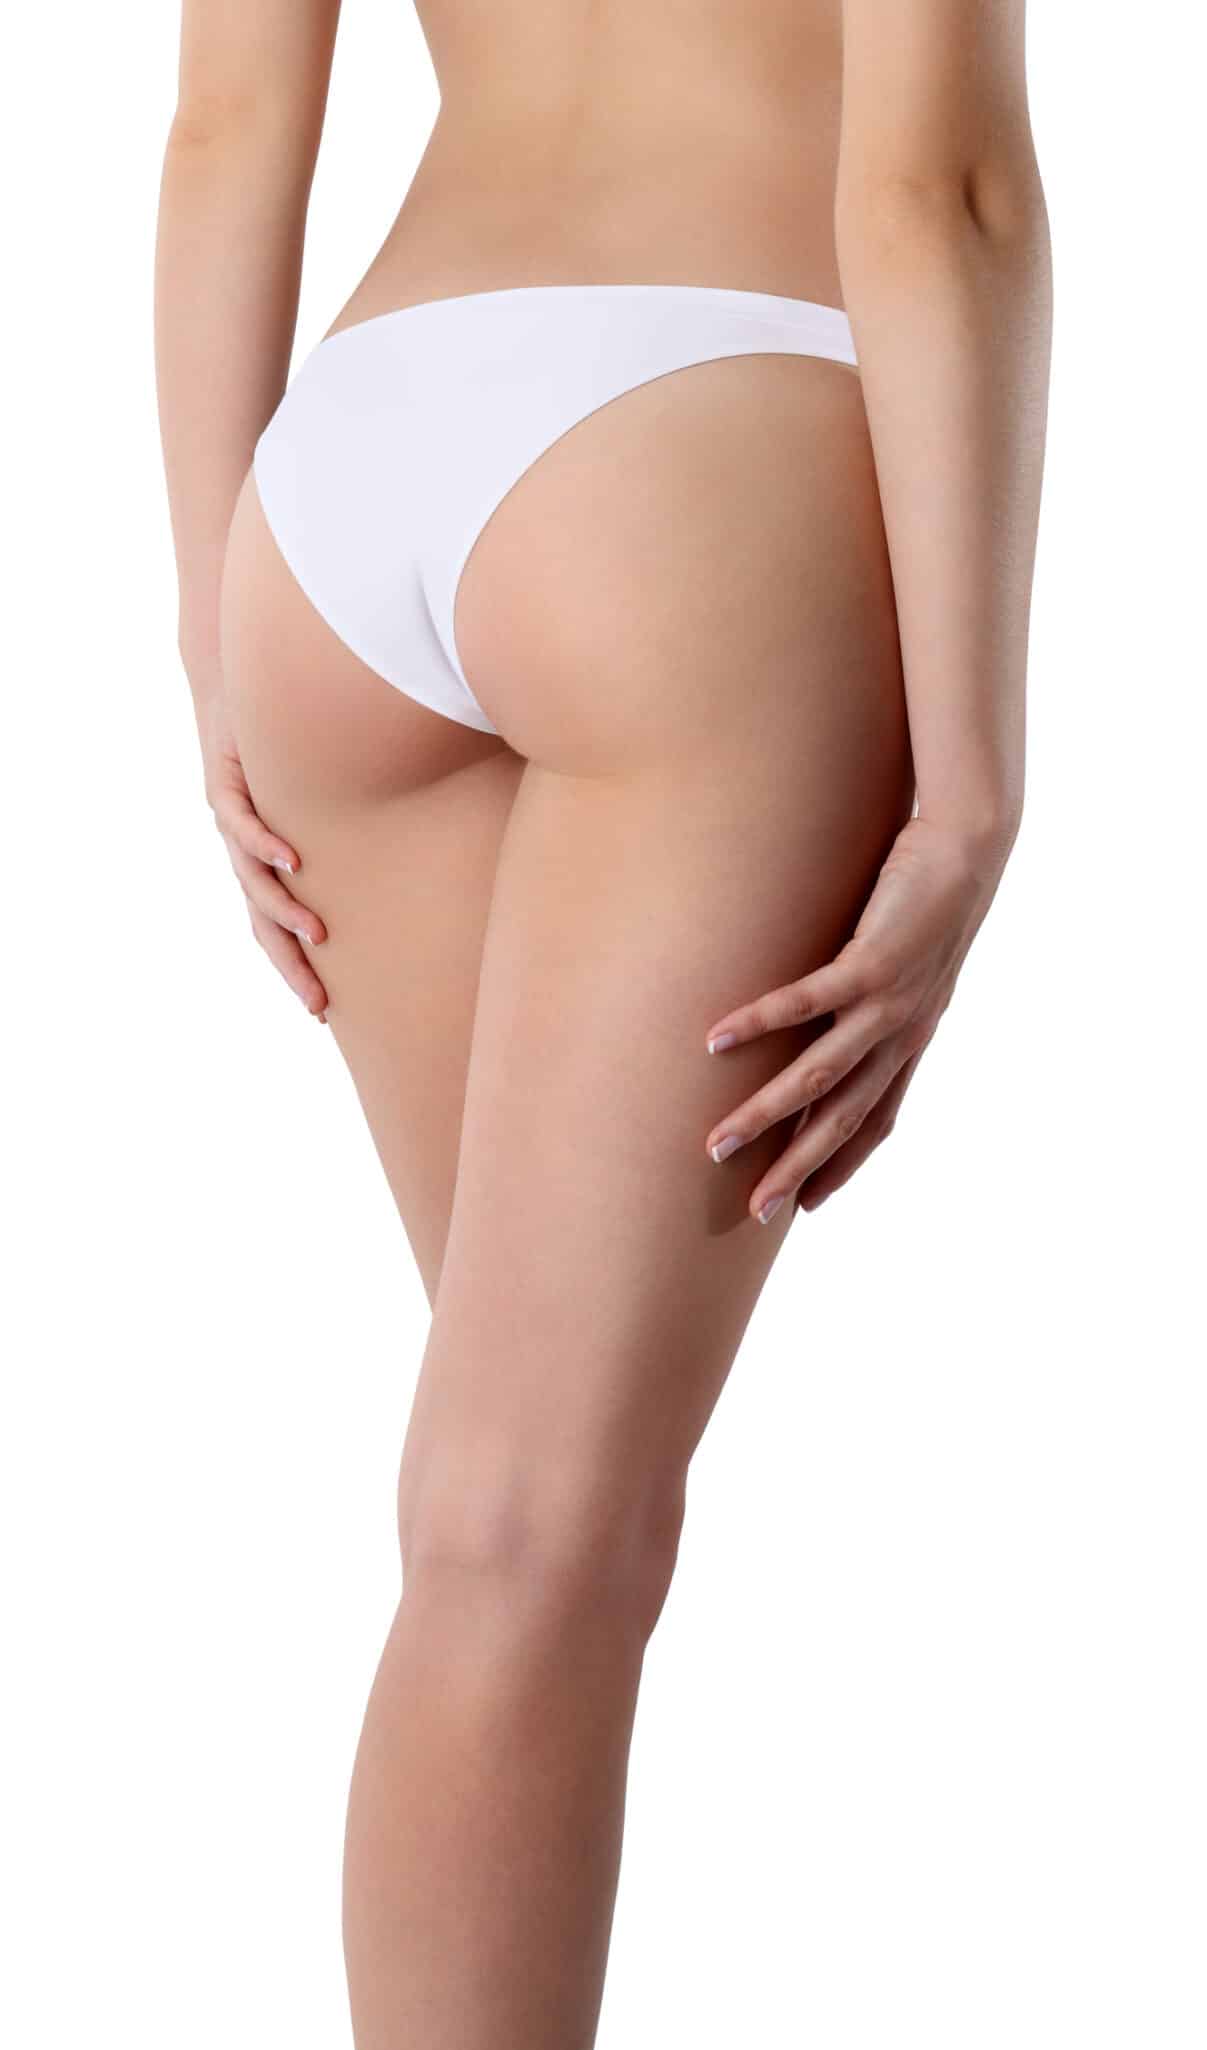 An image of a slim womans butt and legs on a white background